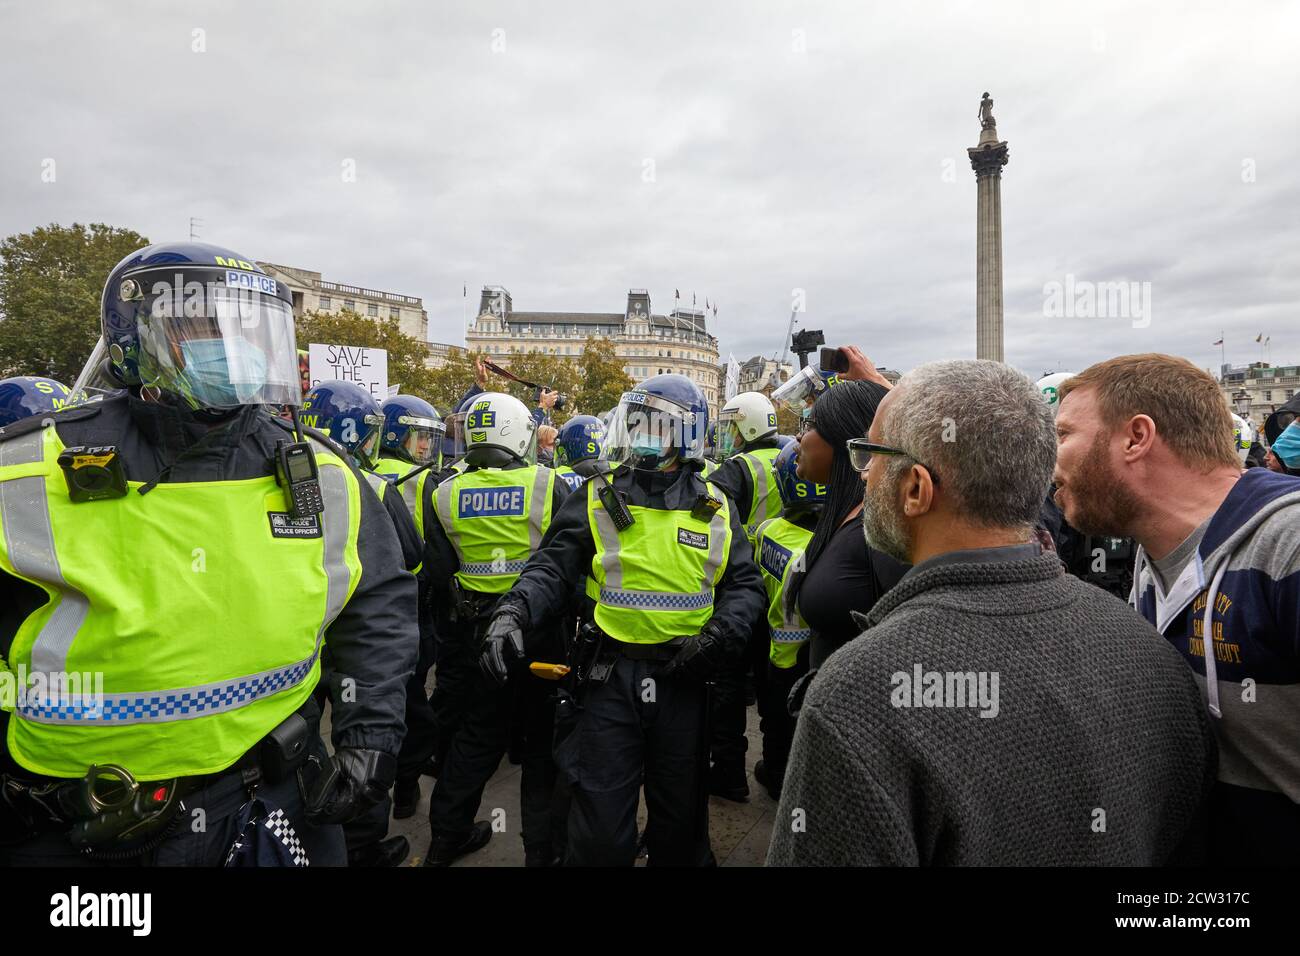 London, UK. - 26 Sept 2020: Protestors remonstrate with police at a protest in Trafalgar Square against coronavirus restrictions. Stock Photo